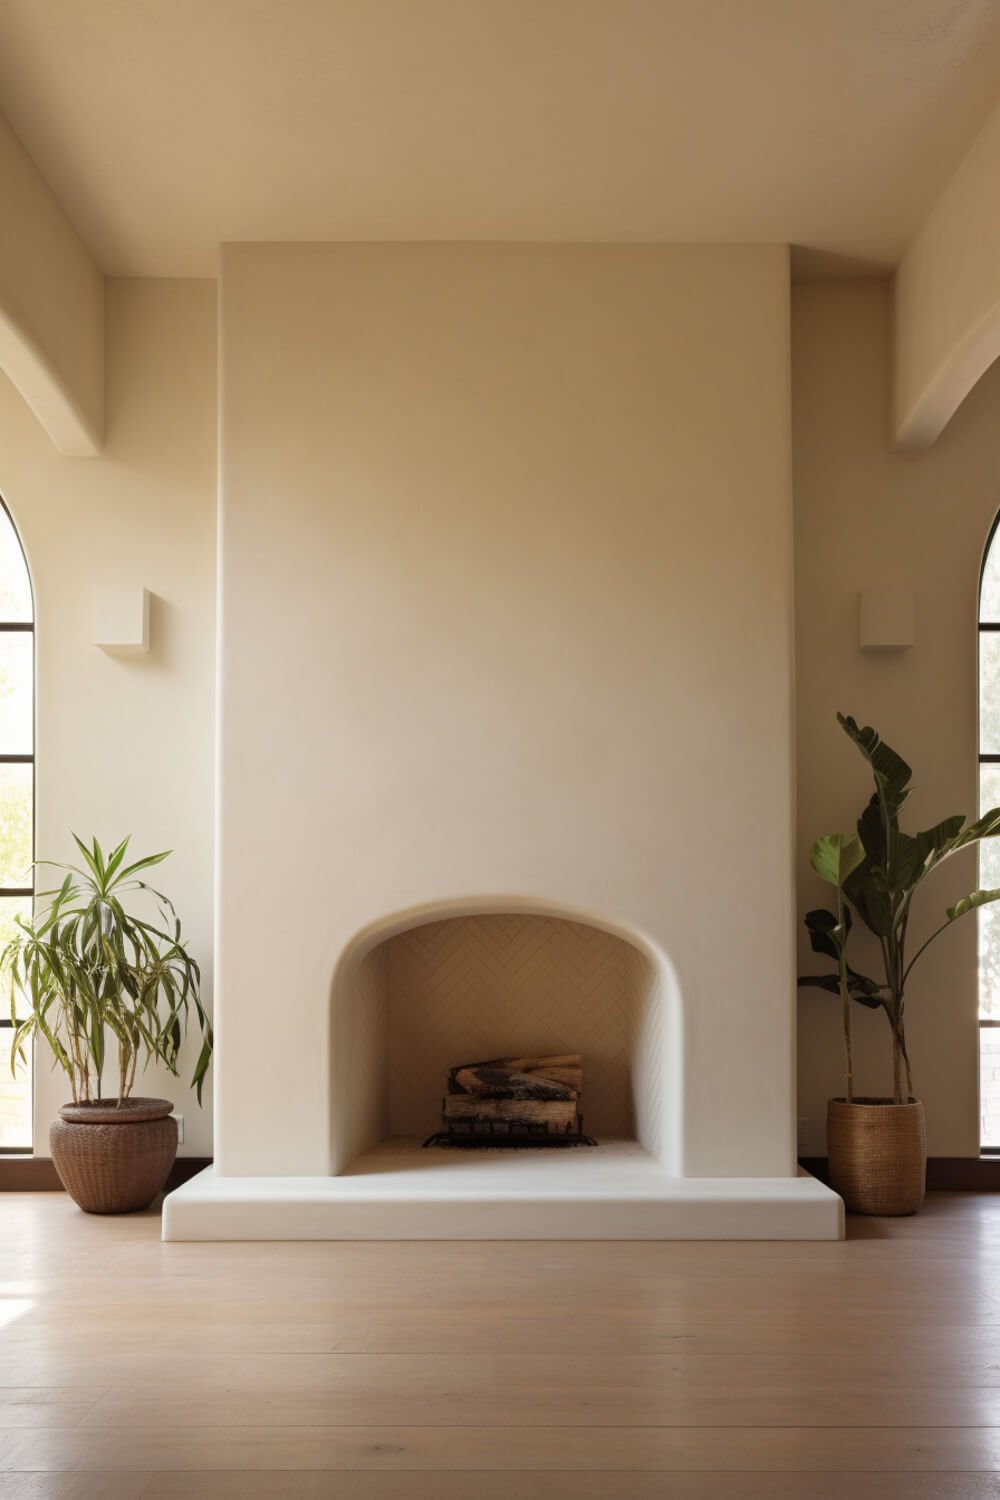 narrow plaster or stucco finish fireplace with herringbone tile